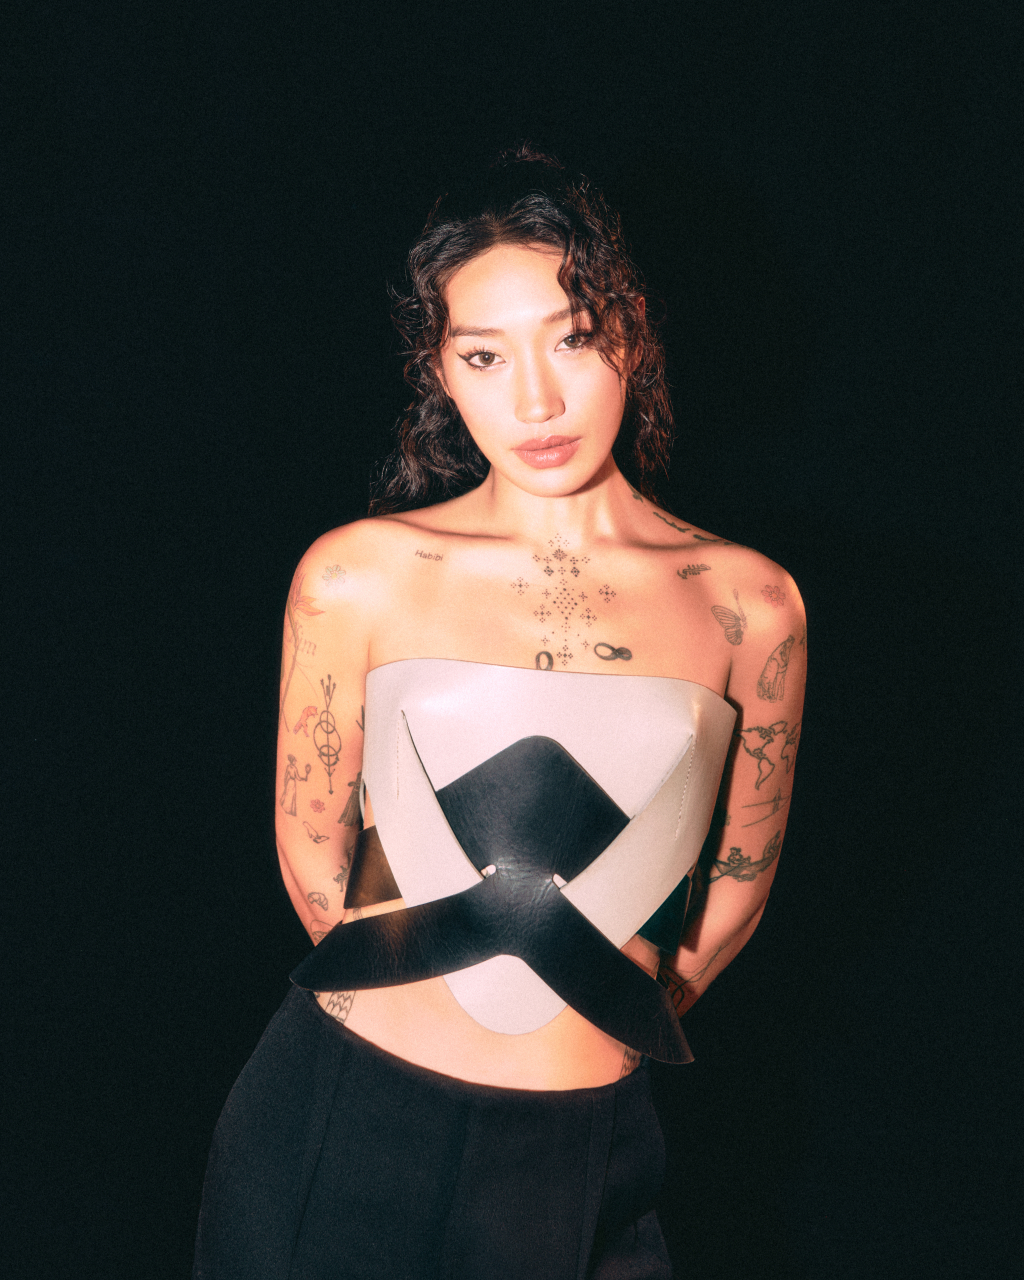 The Year of Peggy Gou